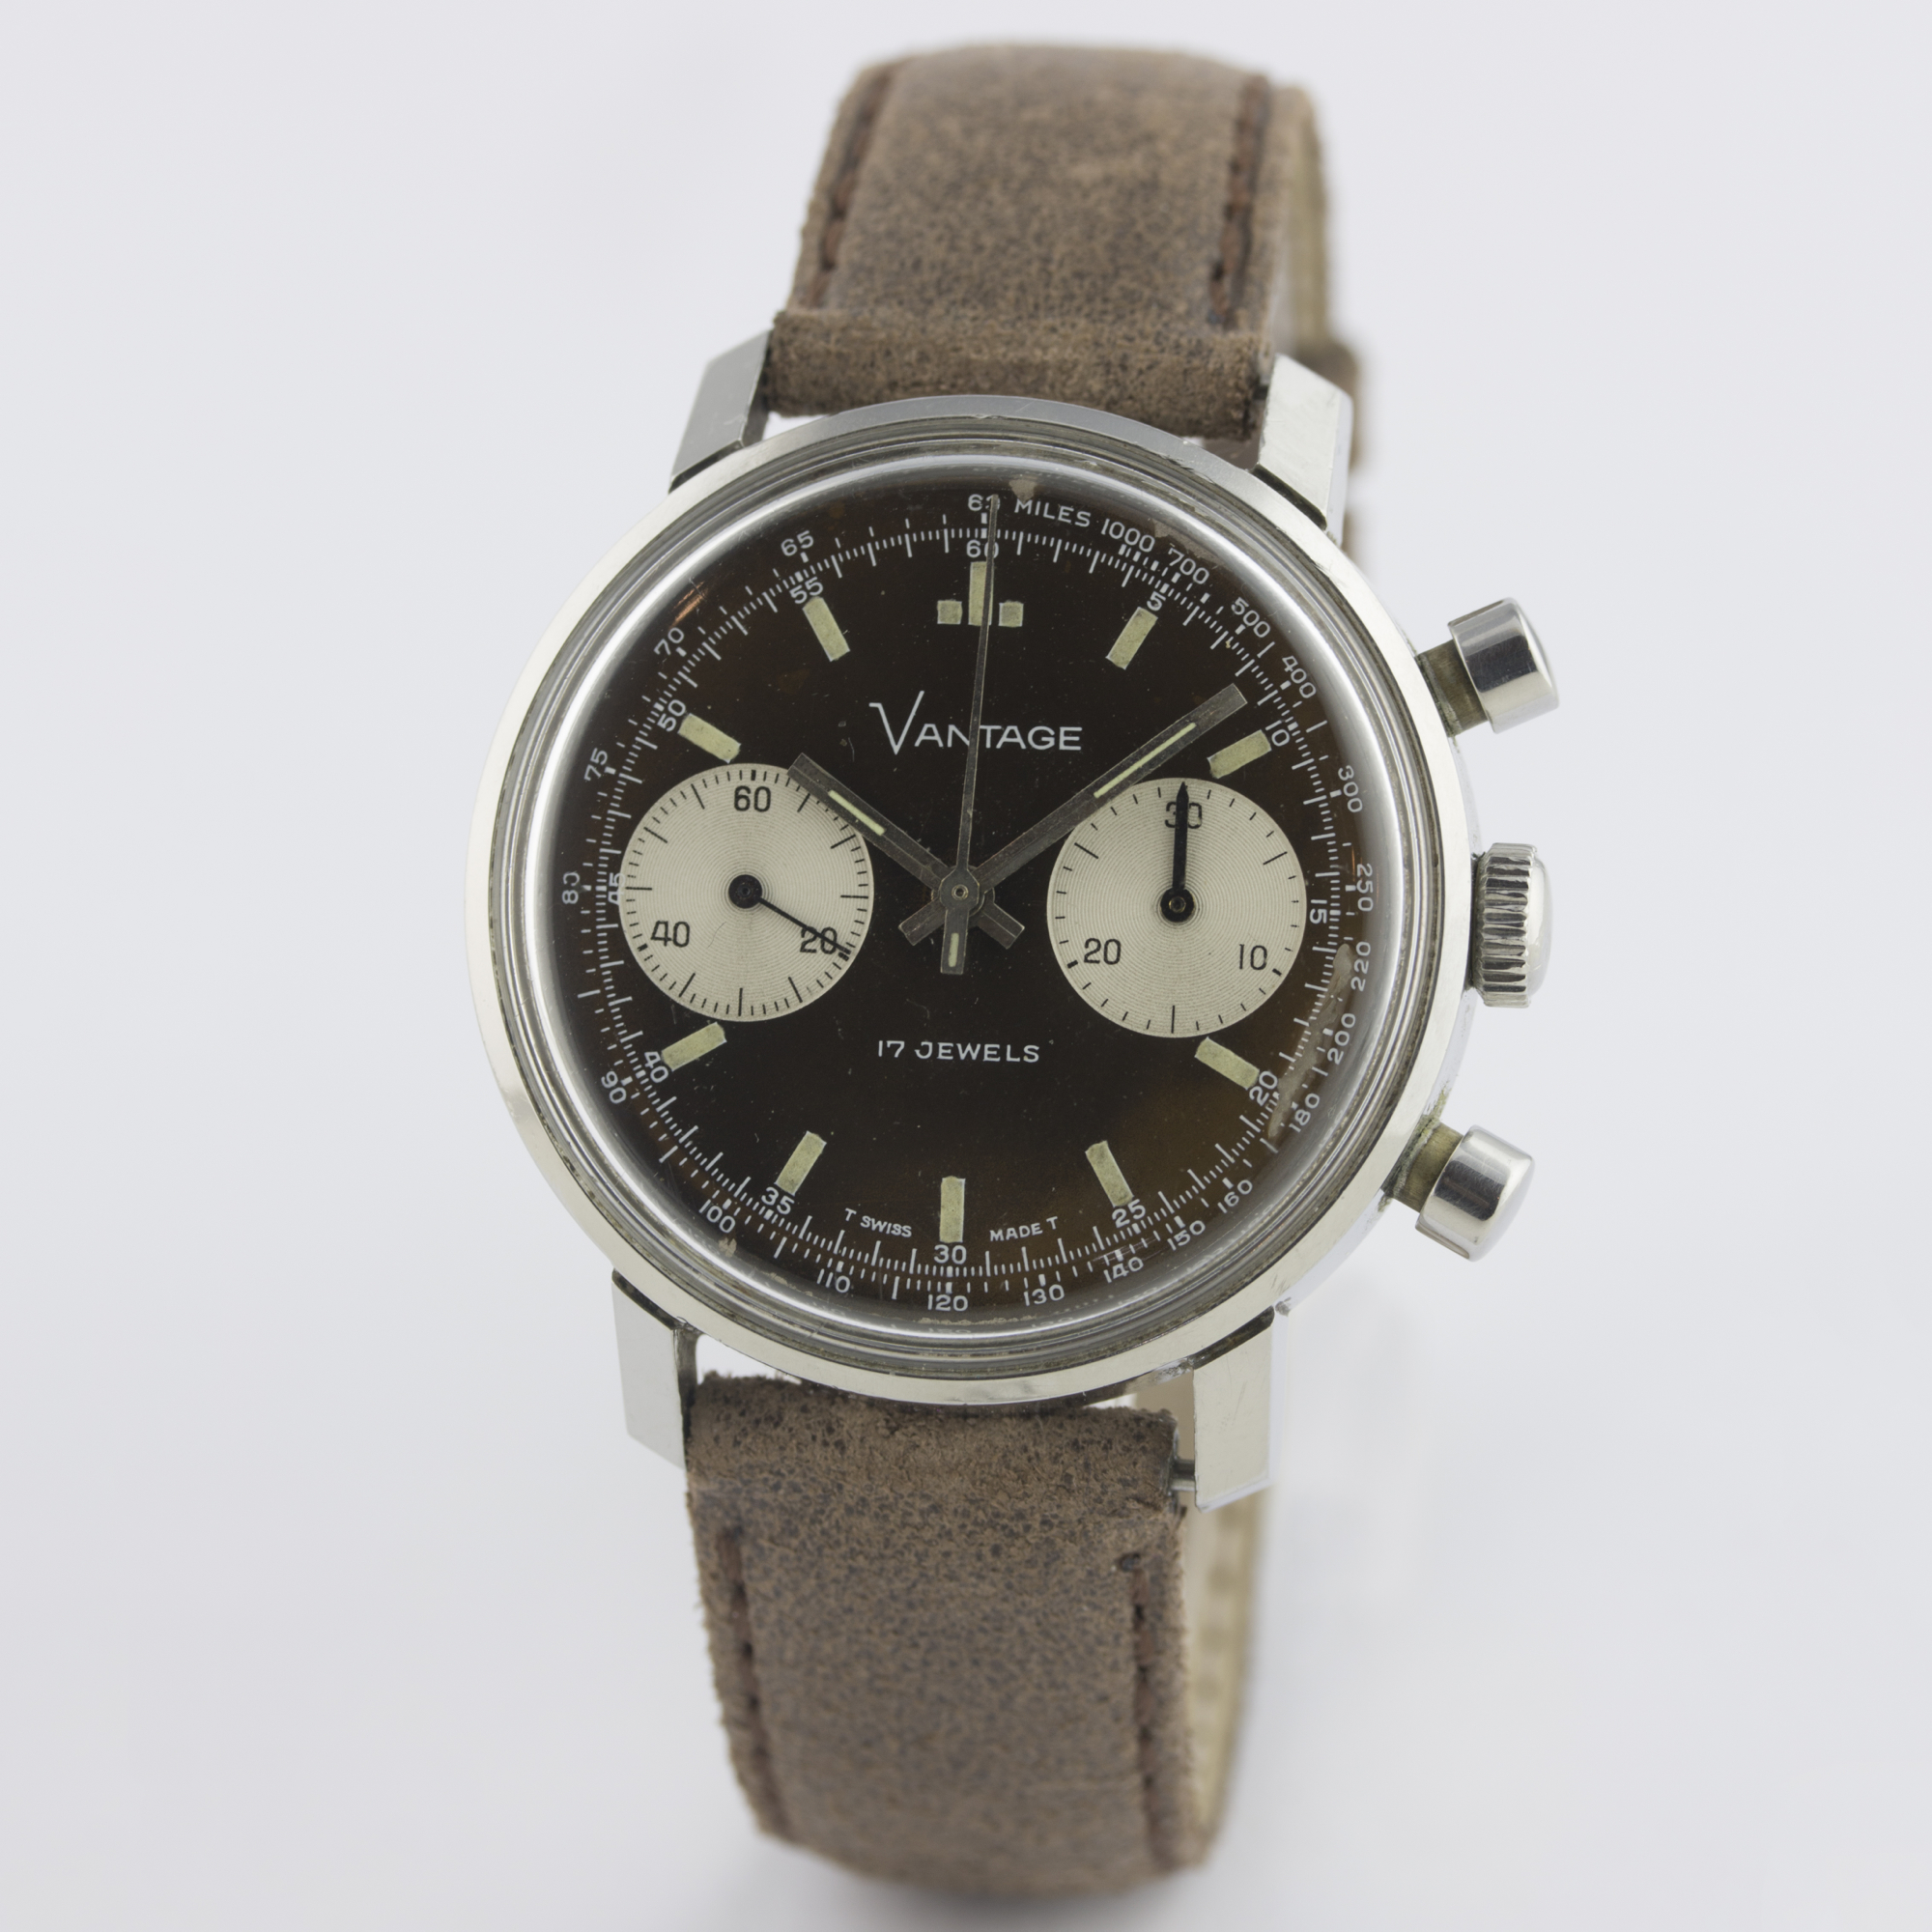 A GENTLEMAN’S STAINLESS STEEL VANTAGE CHRONOGRAPH WRIST WATCH CIRCA 1970 WITH "CHOCOLATE" DIAL D: - Image 2 of 8